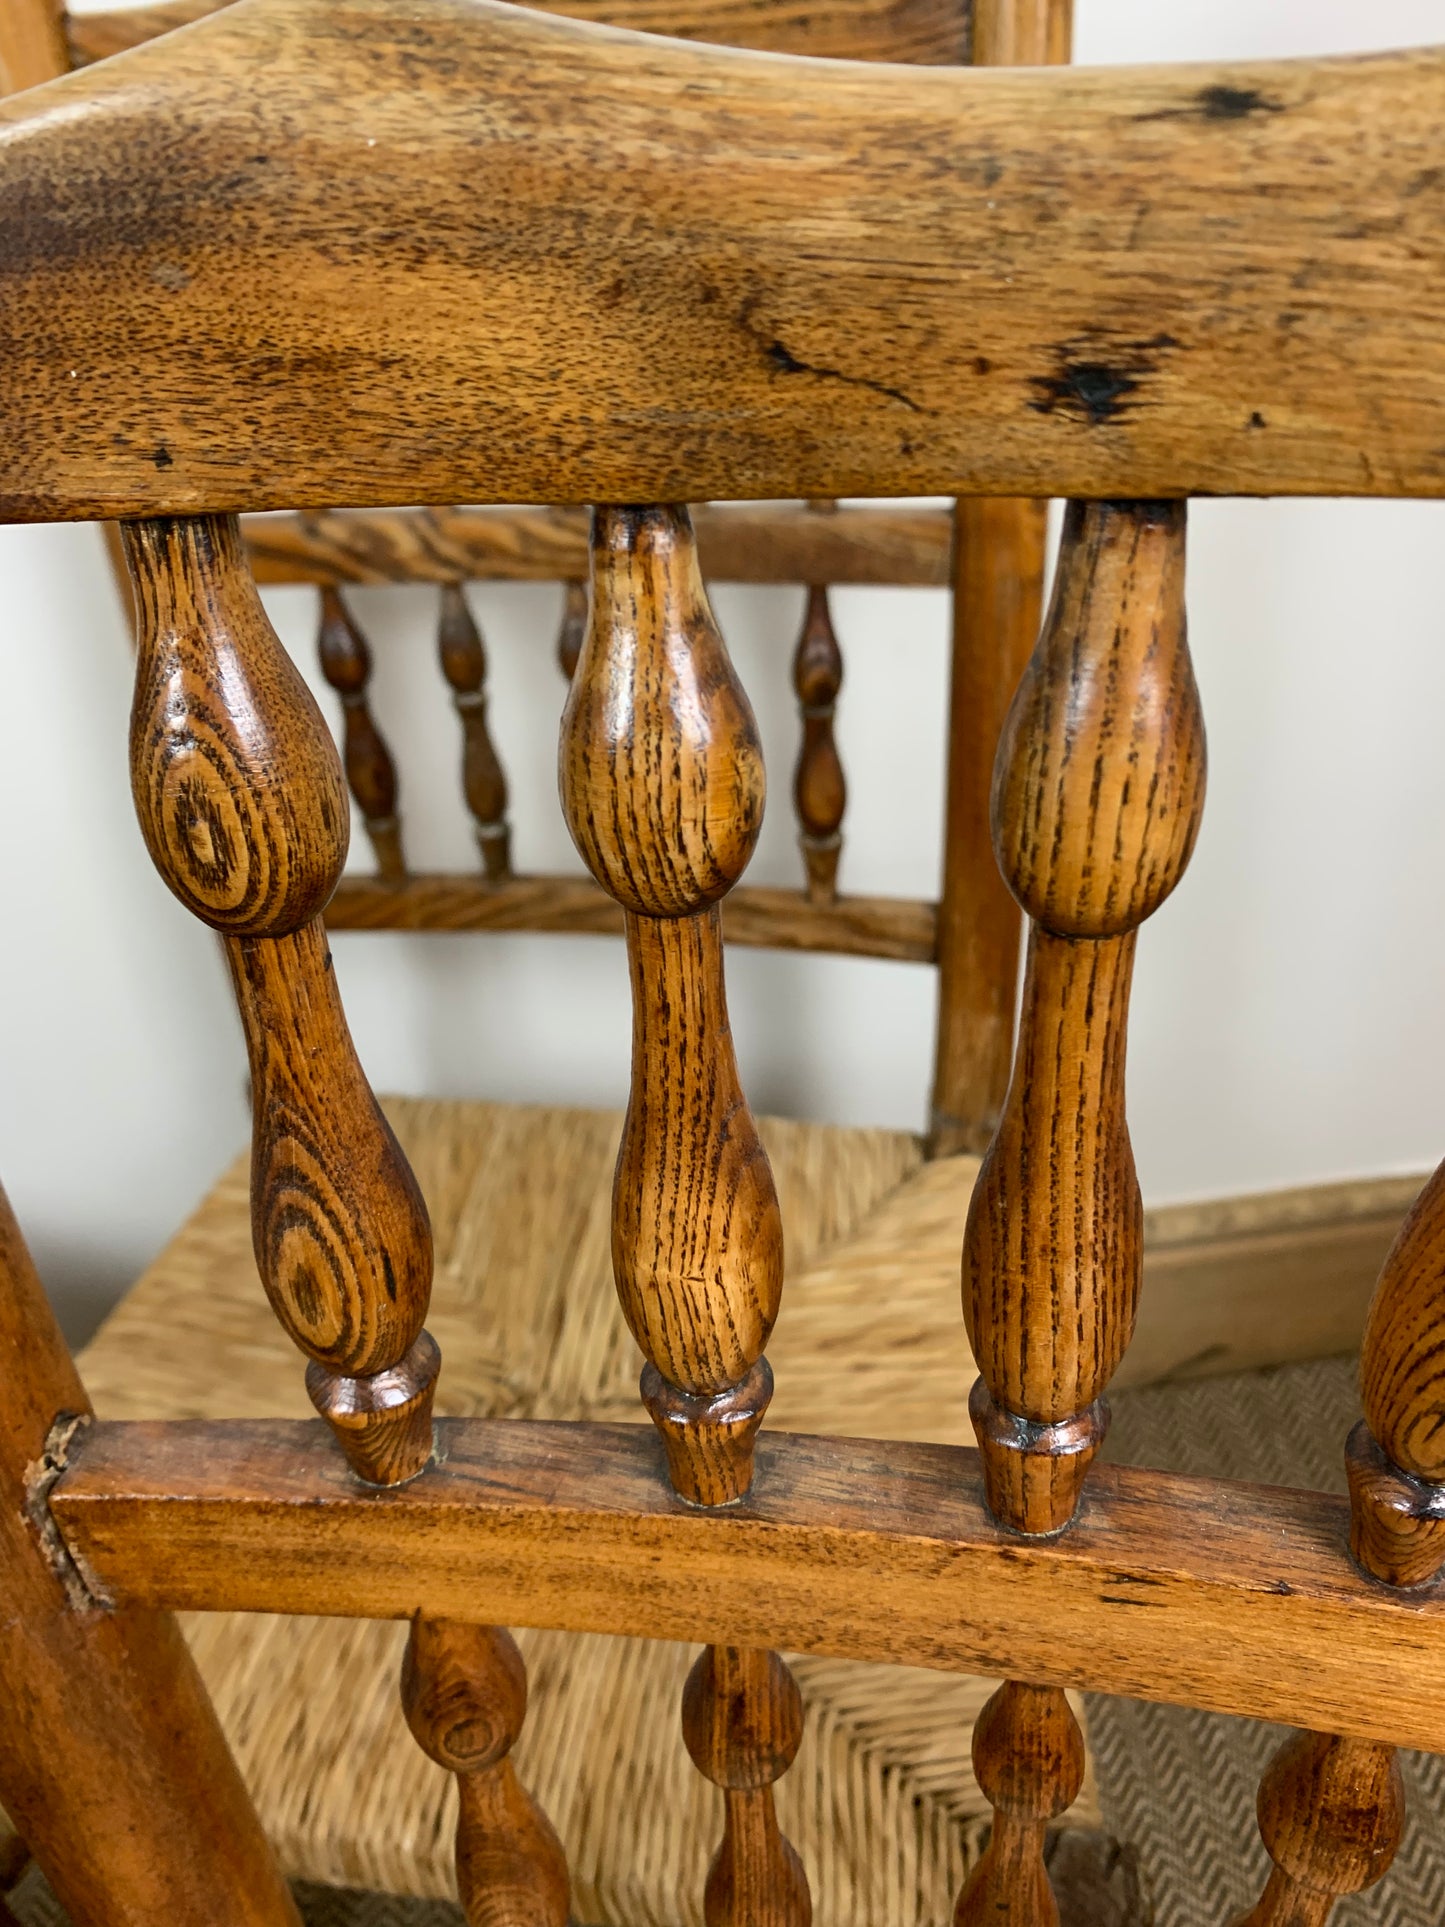 Ash and Fruitwood Chairs - Artistry of Nature and Craftsmanship